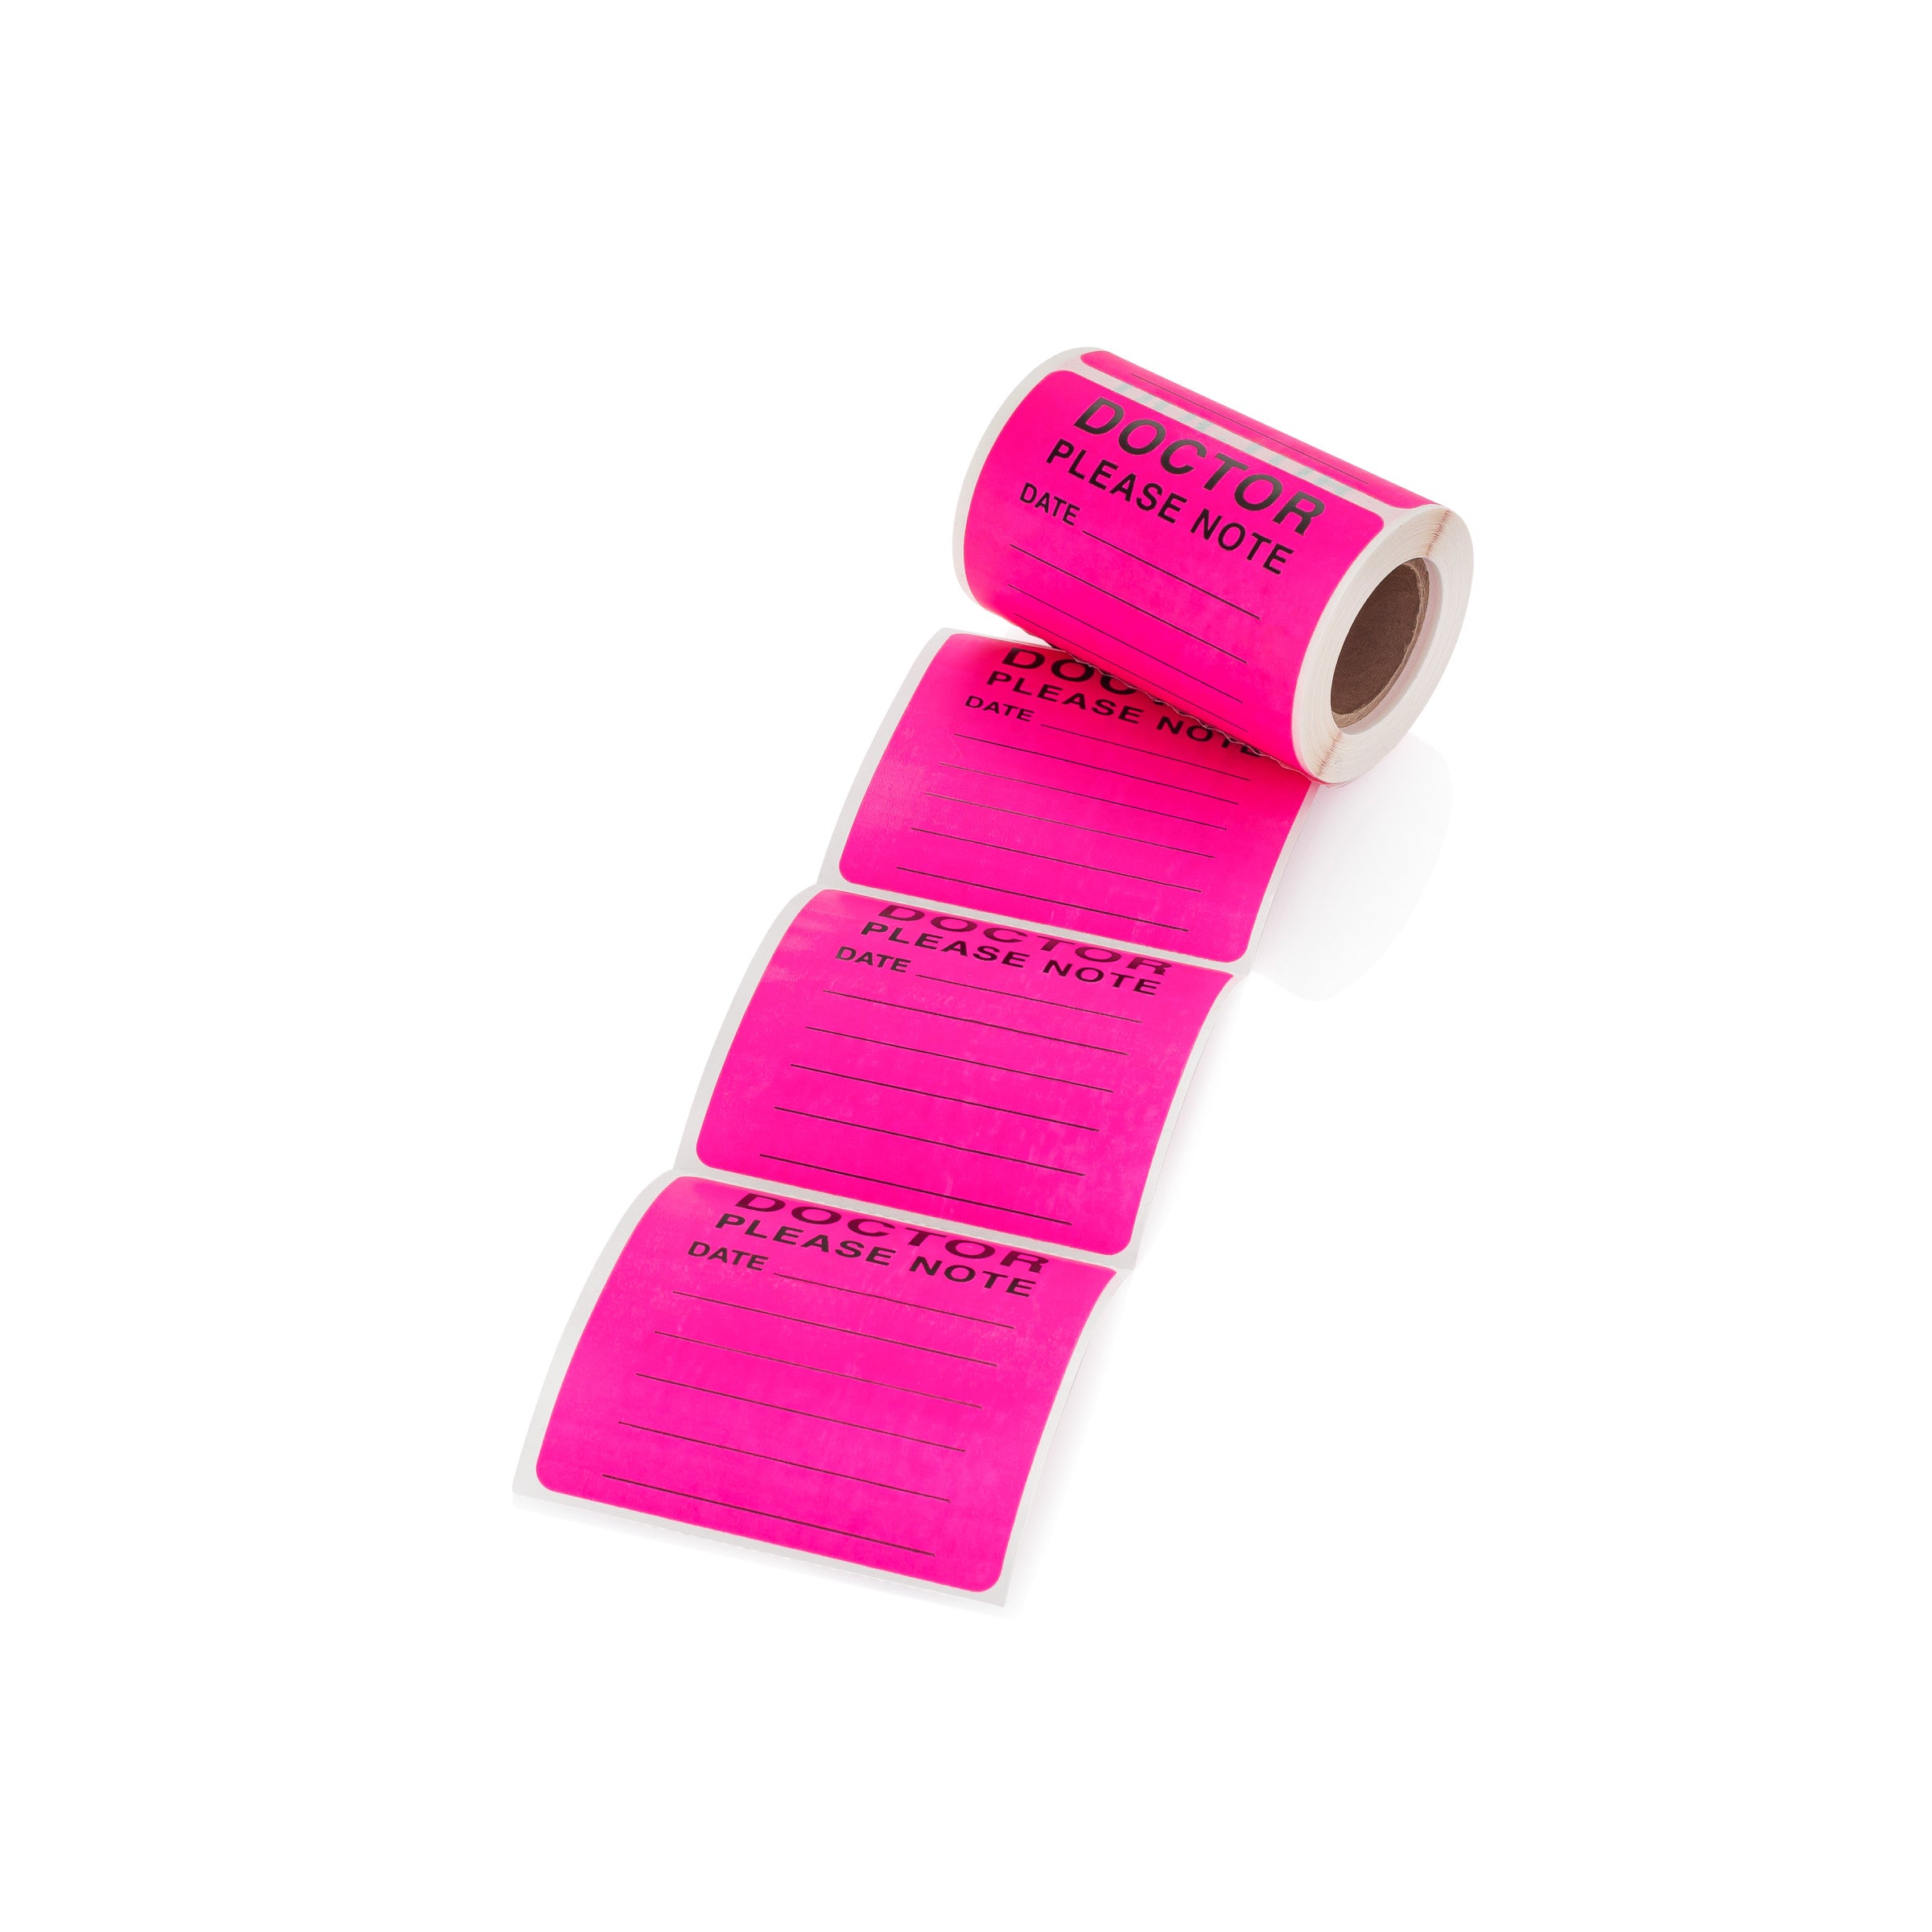 Doctor Please Note Alert and Instruction Labels, Pink, W2.5" x H.2.5" (Roll of 100)